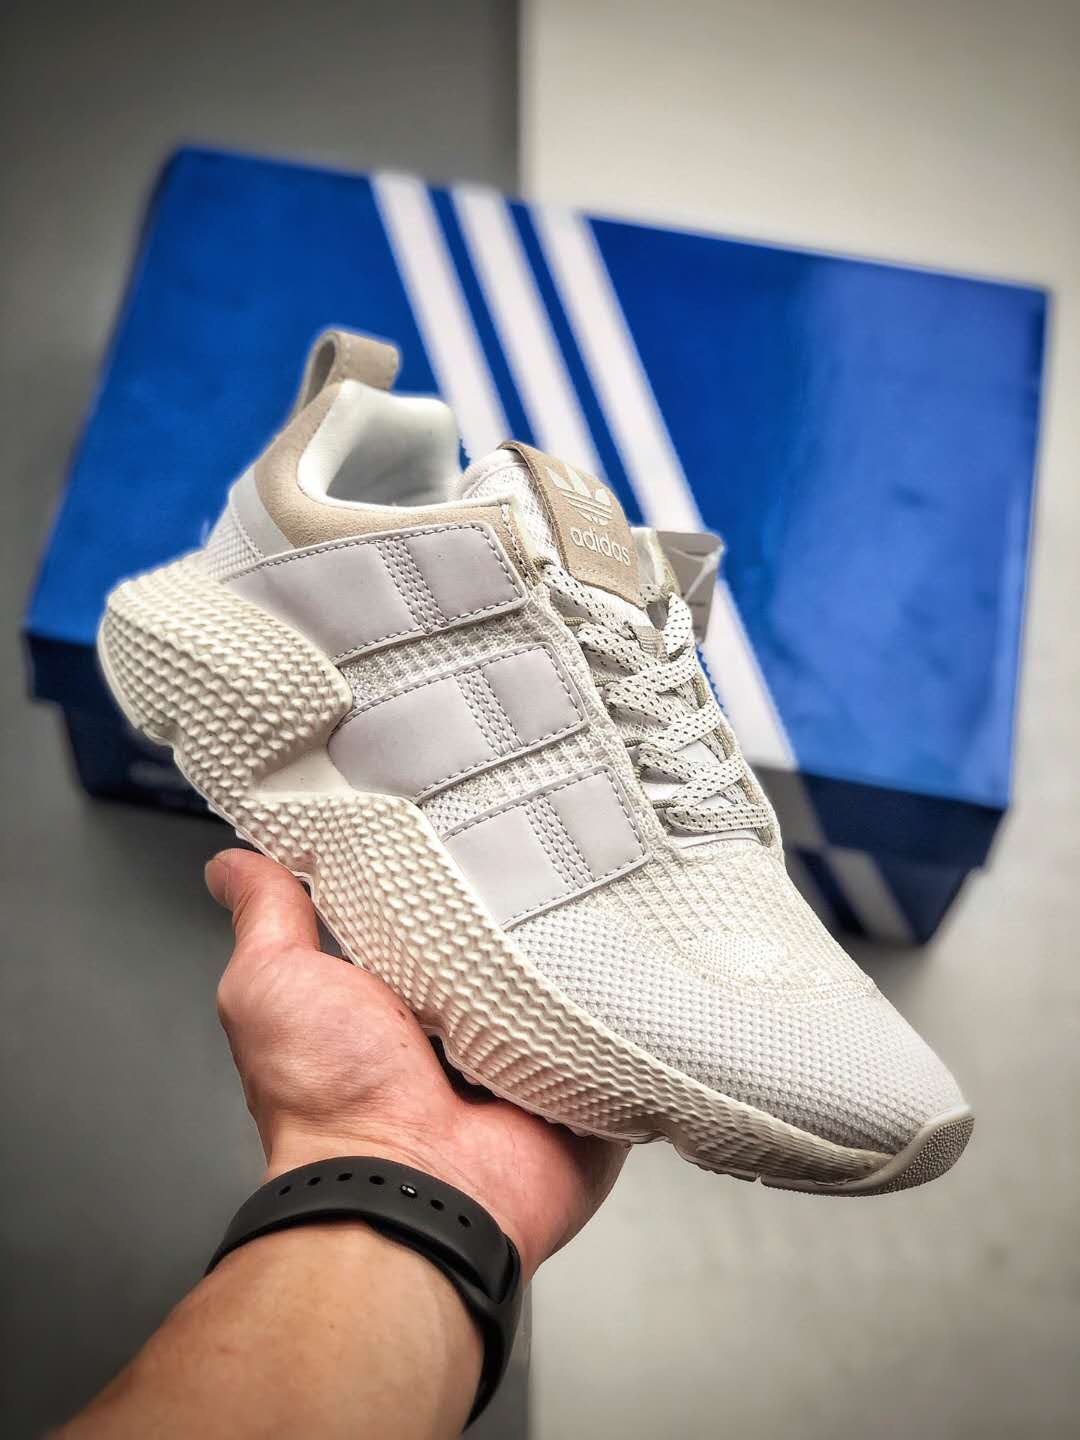 Adidas Prophere V2 'White' FW4261 | Buy Originals Sneakers Online